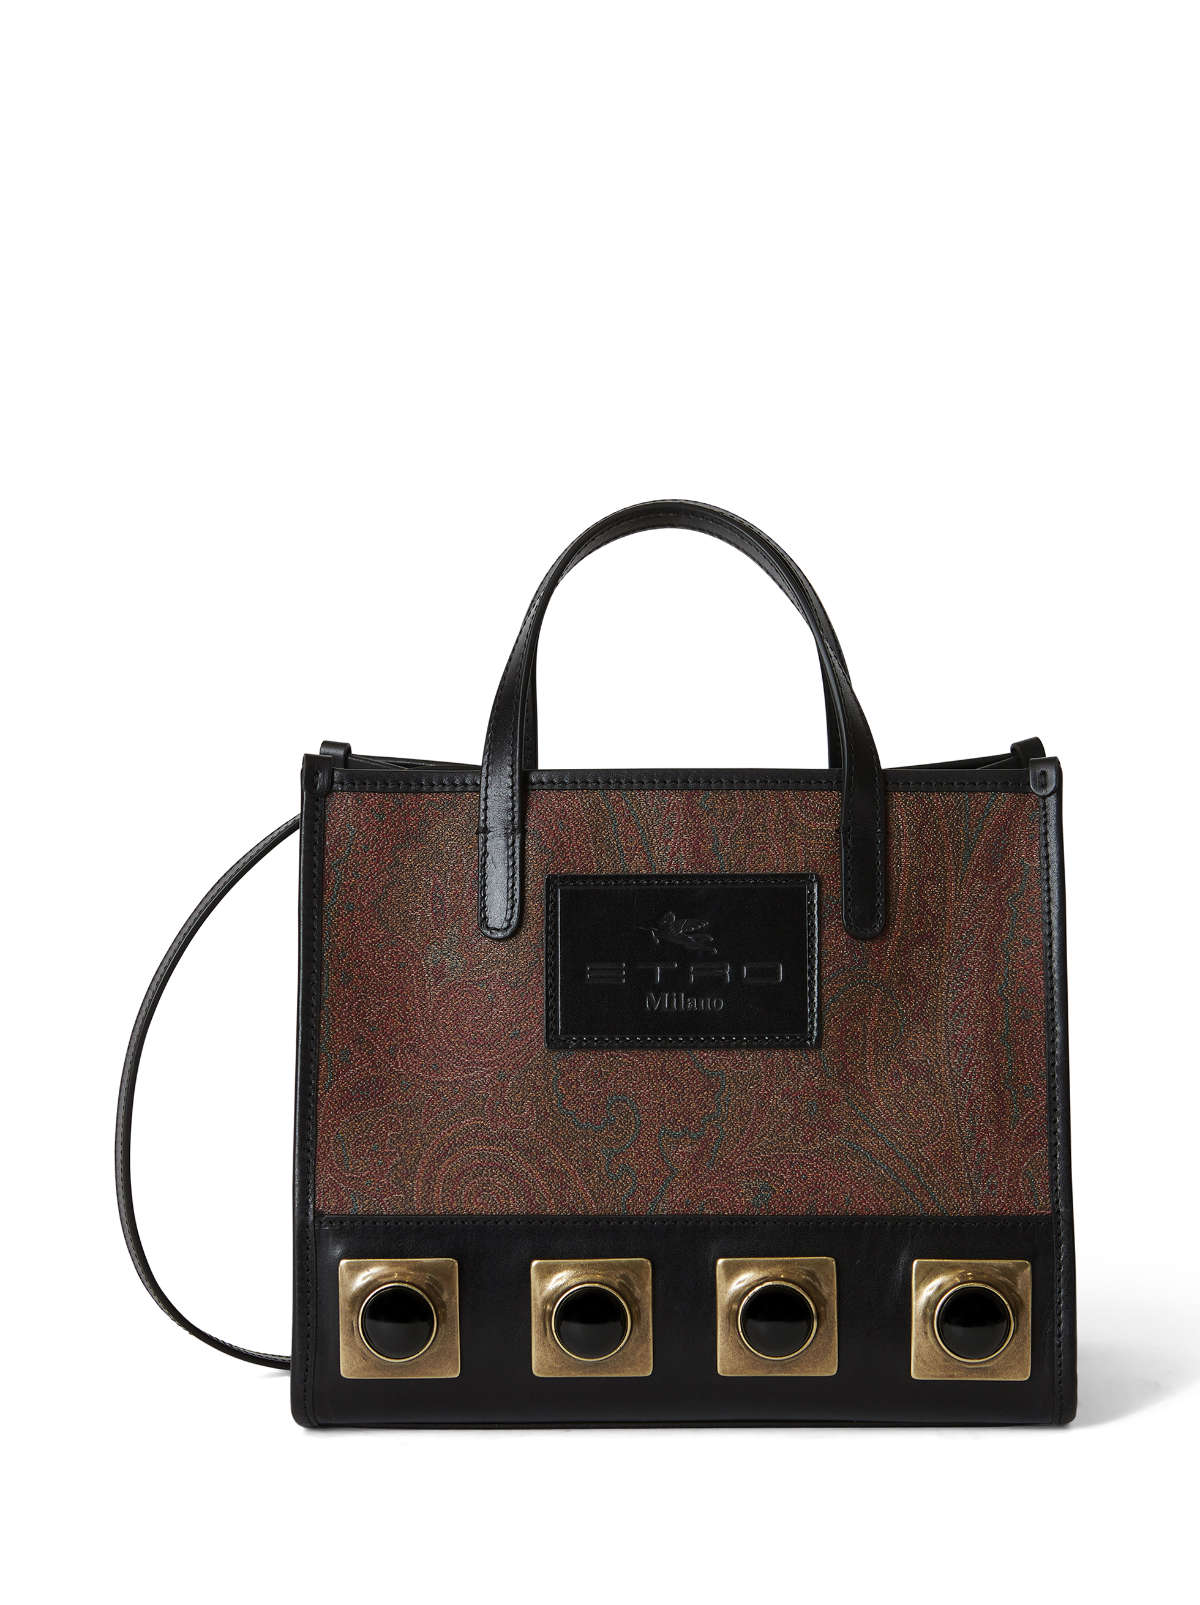 Etro: Etro Launched The New Crown Me Collection - Luxferity